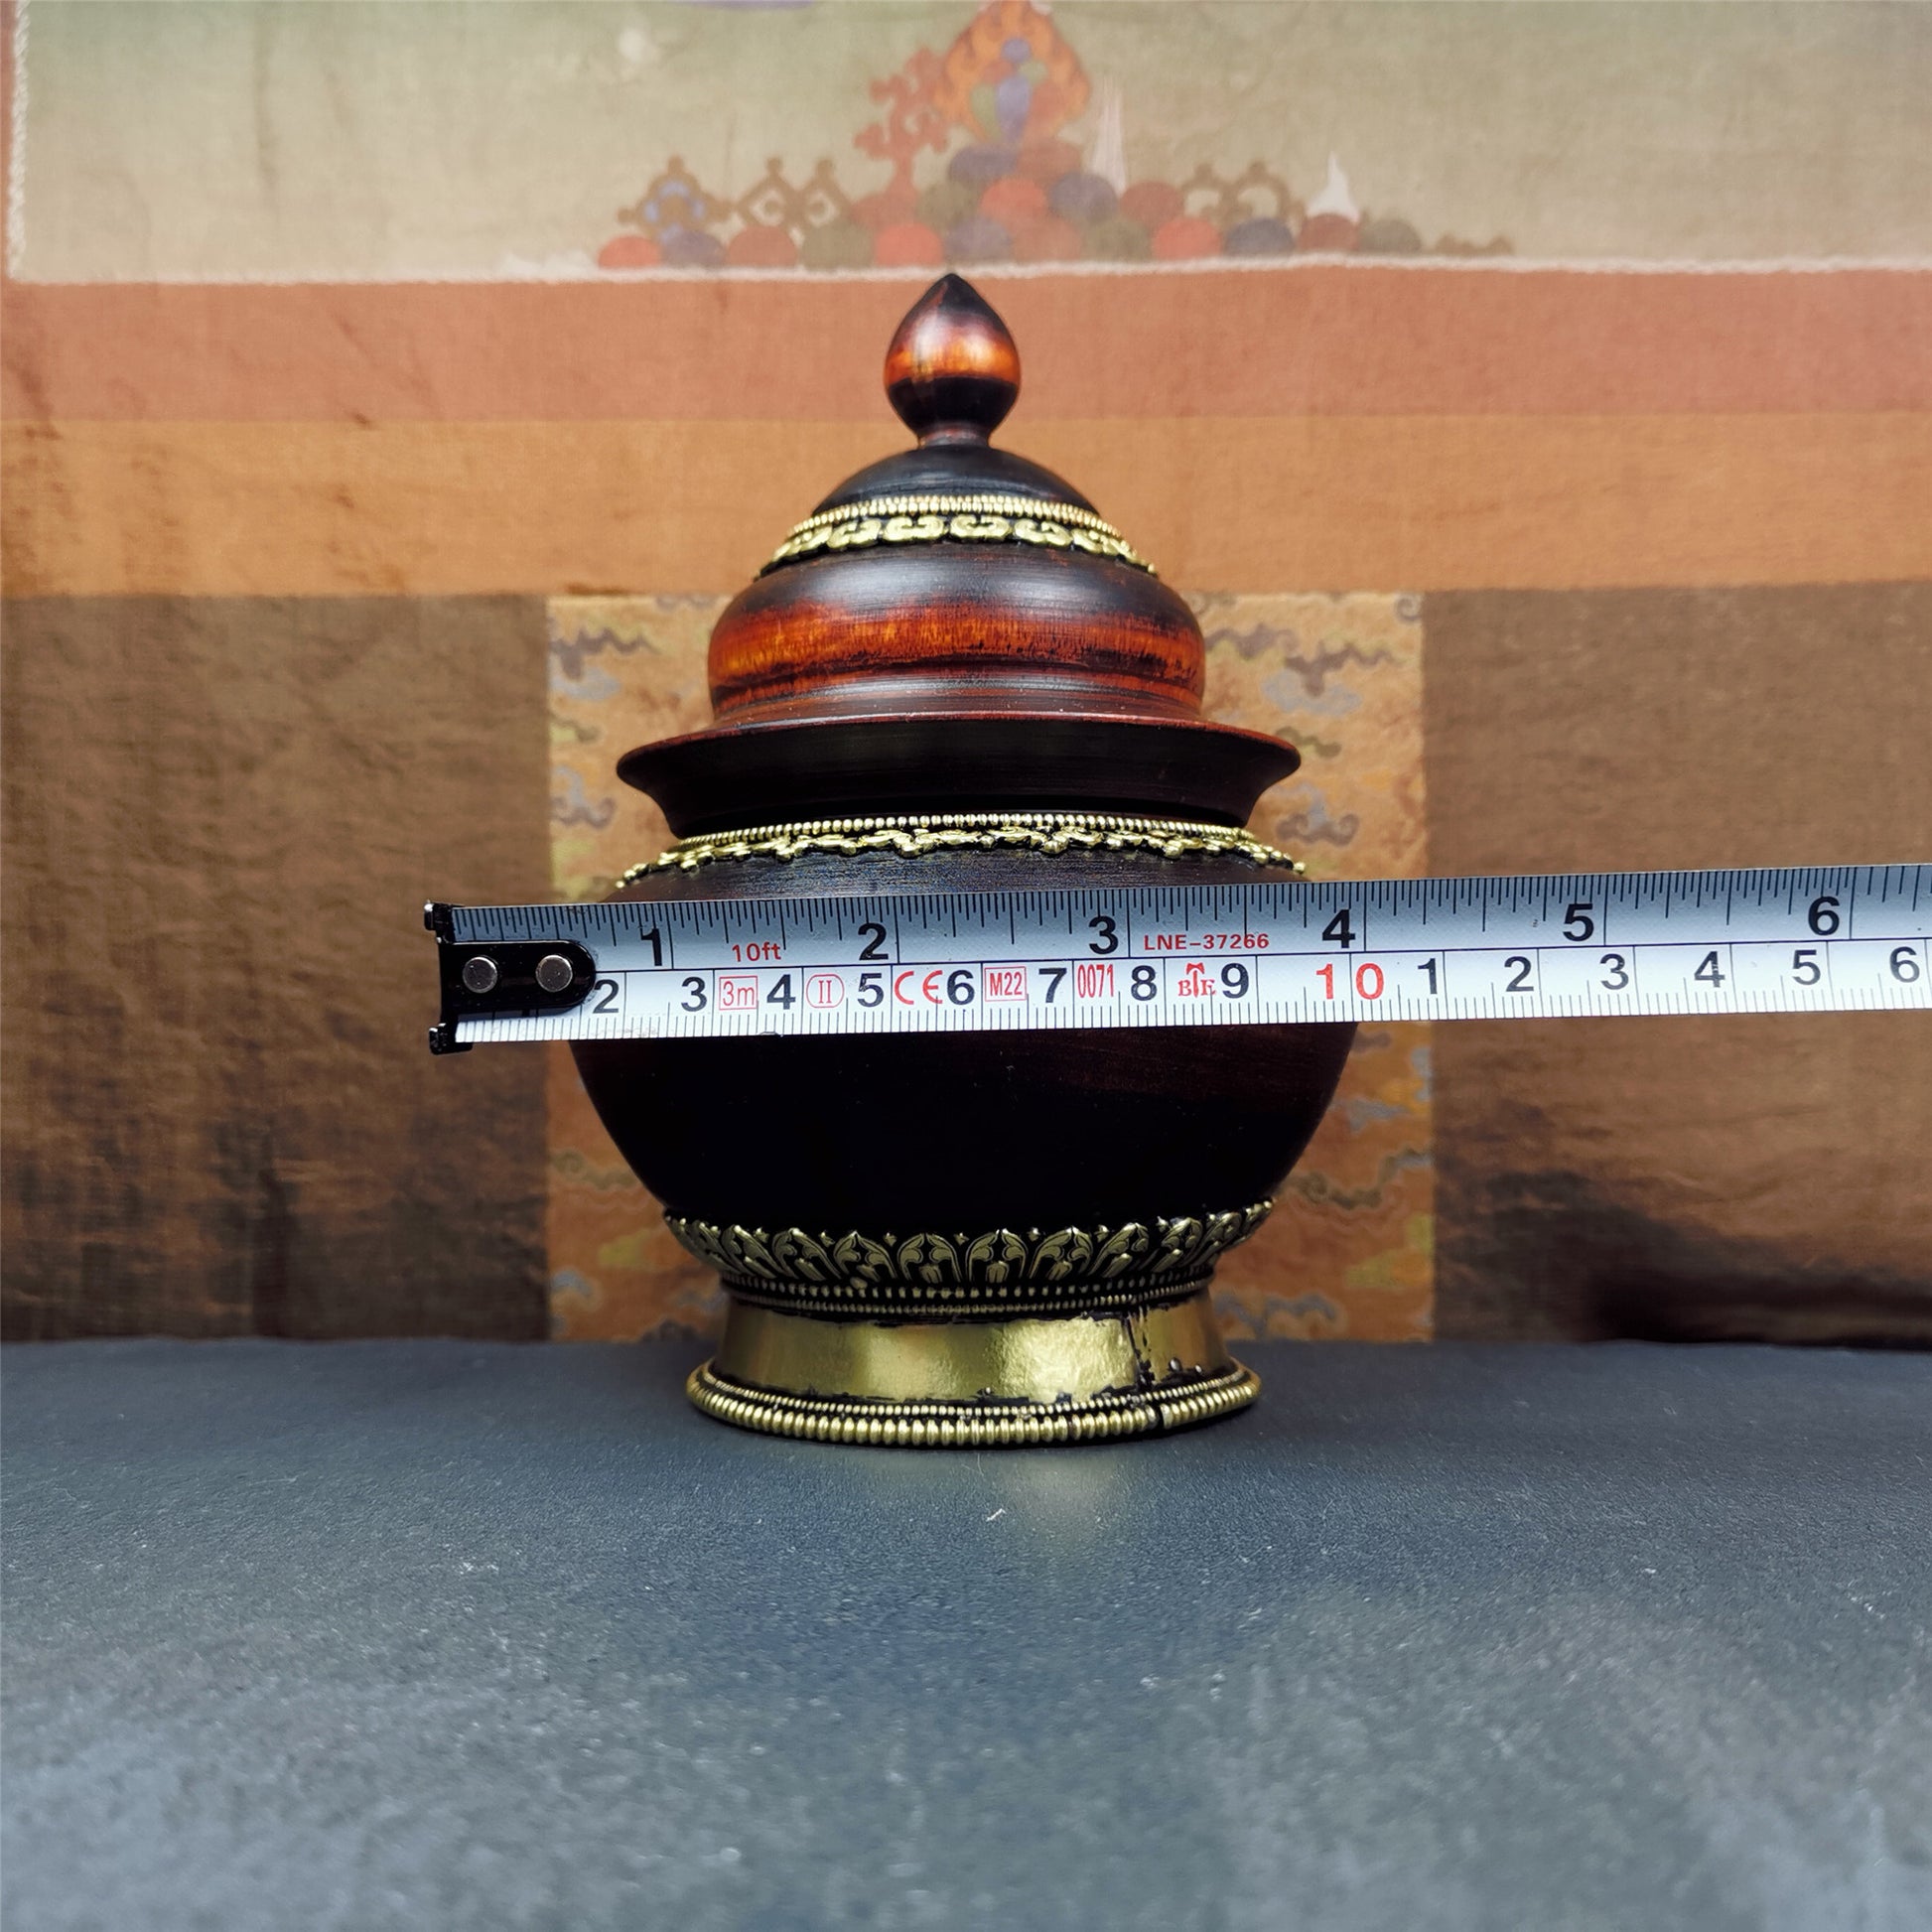 This type of tibetan offering bowls was handmade by Tibetan craftsmen from Tibet in 2000's.From Hepo Town, Baiyu County, the birthplace of the famous Tibetan handicrafts. It is hand carved from a single piece of Shesum wood,carved into stupa shape,and decorated with brass patterns,size is 6.3" × 4.0”.